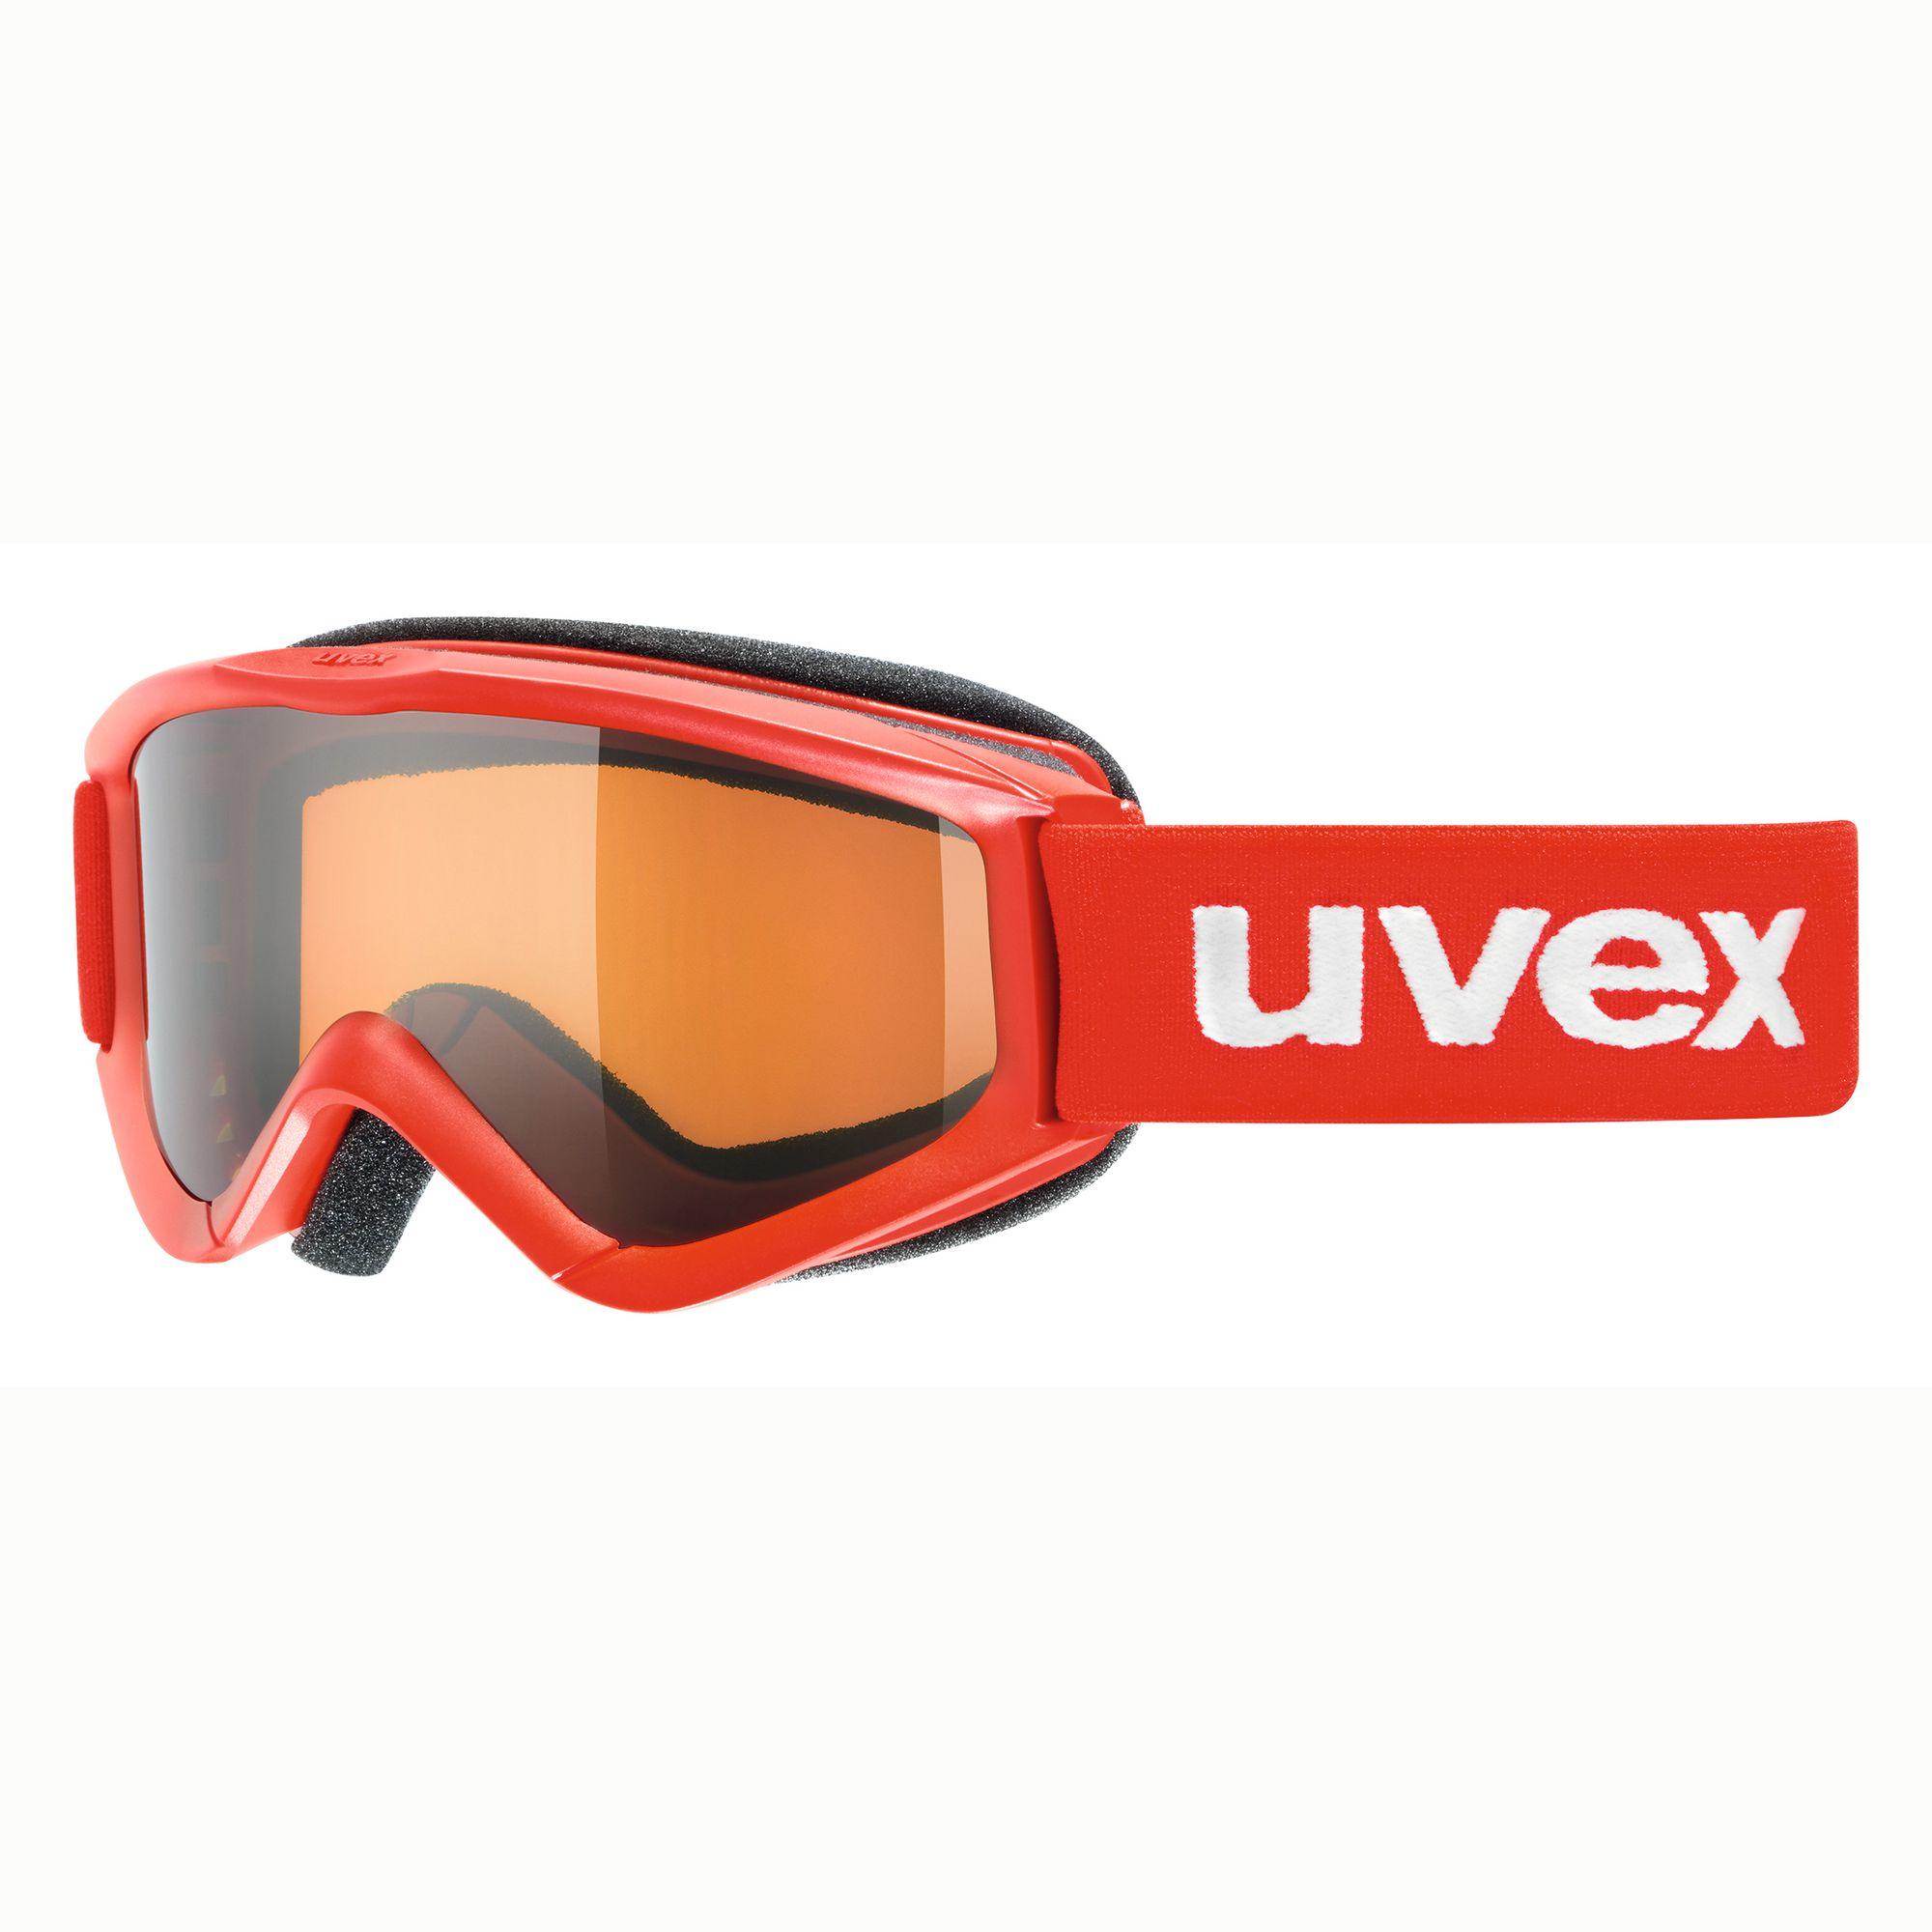 UVEX Size Small Ski And Snowboard Mask Uvex Speedy Pro - Red